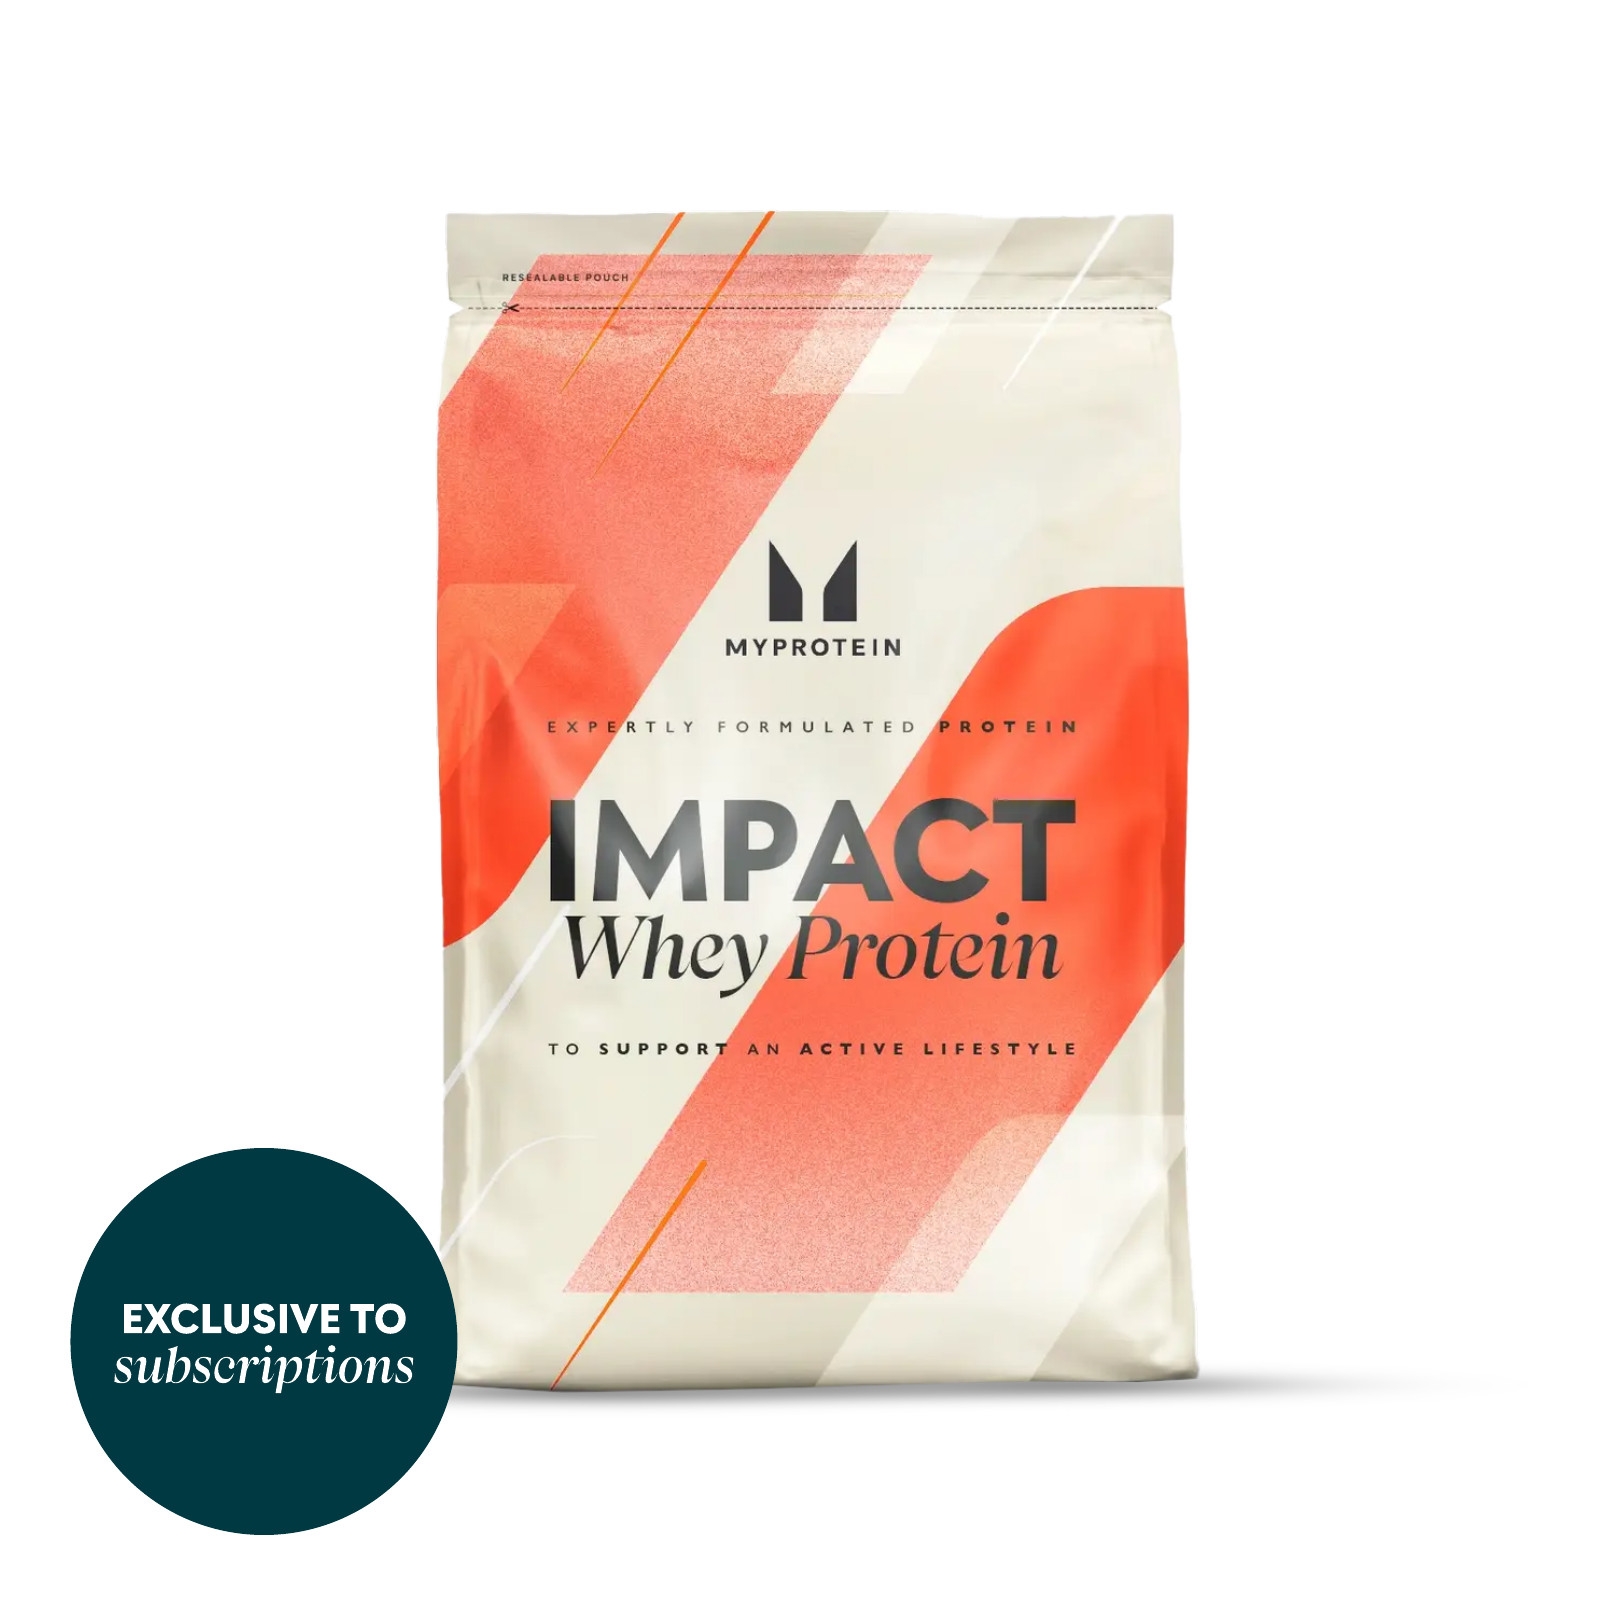 Subscription Exclusive: Impact Whey Protein (500g)